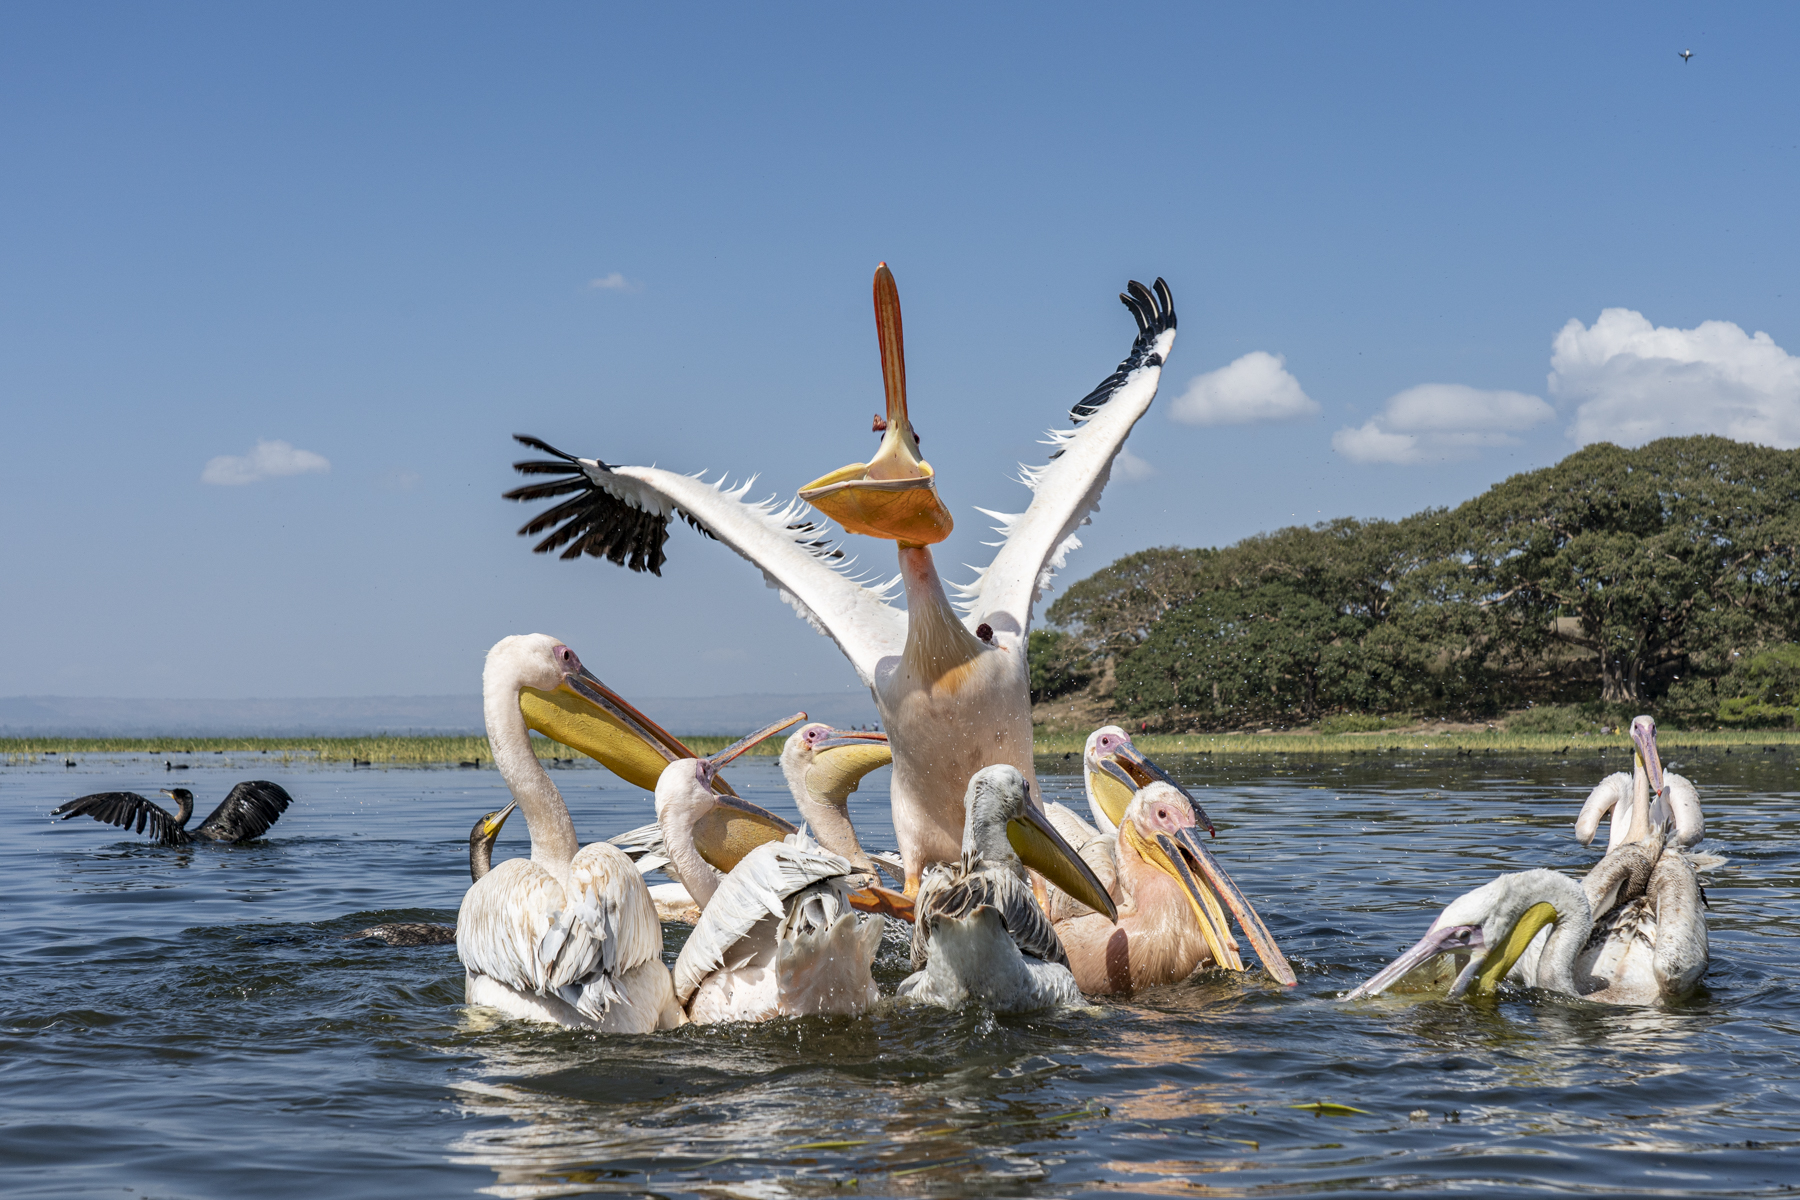 A Great White Pelican steals a march on its rivals at Awassa Fish Market during our Ethiopia wildlife photography tour (image by Mark Beaman)